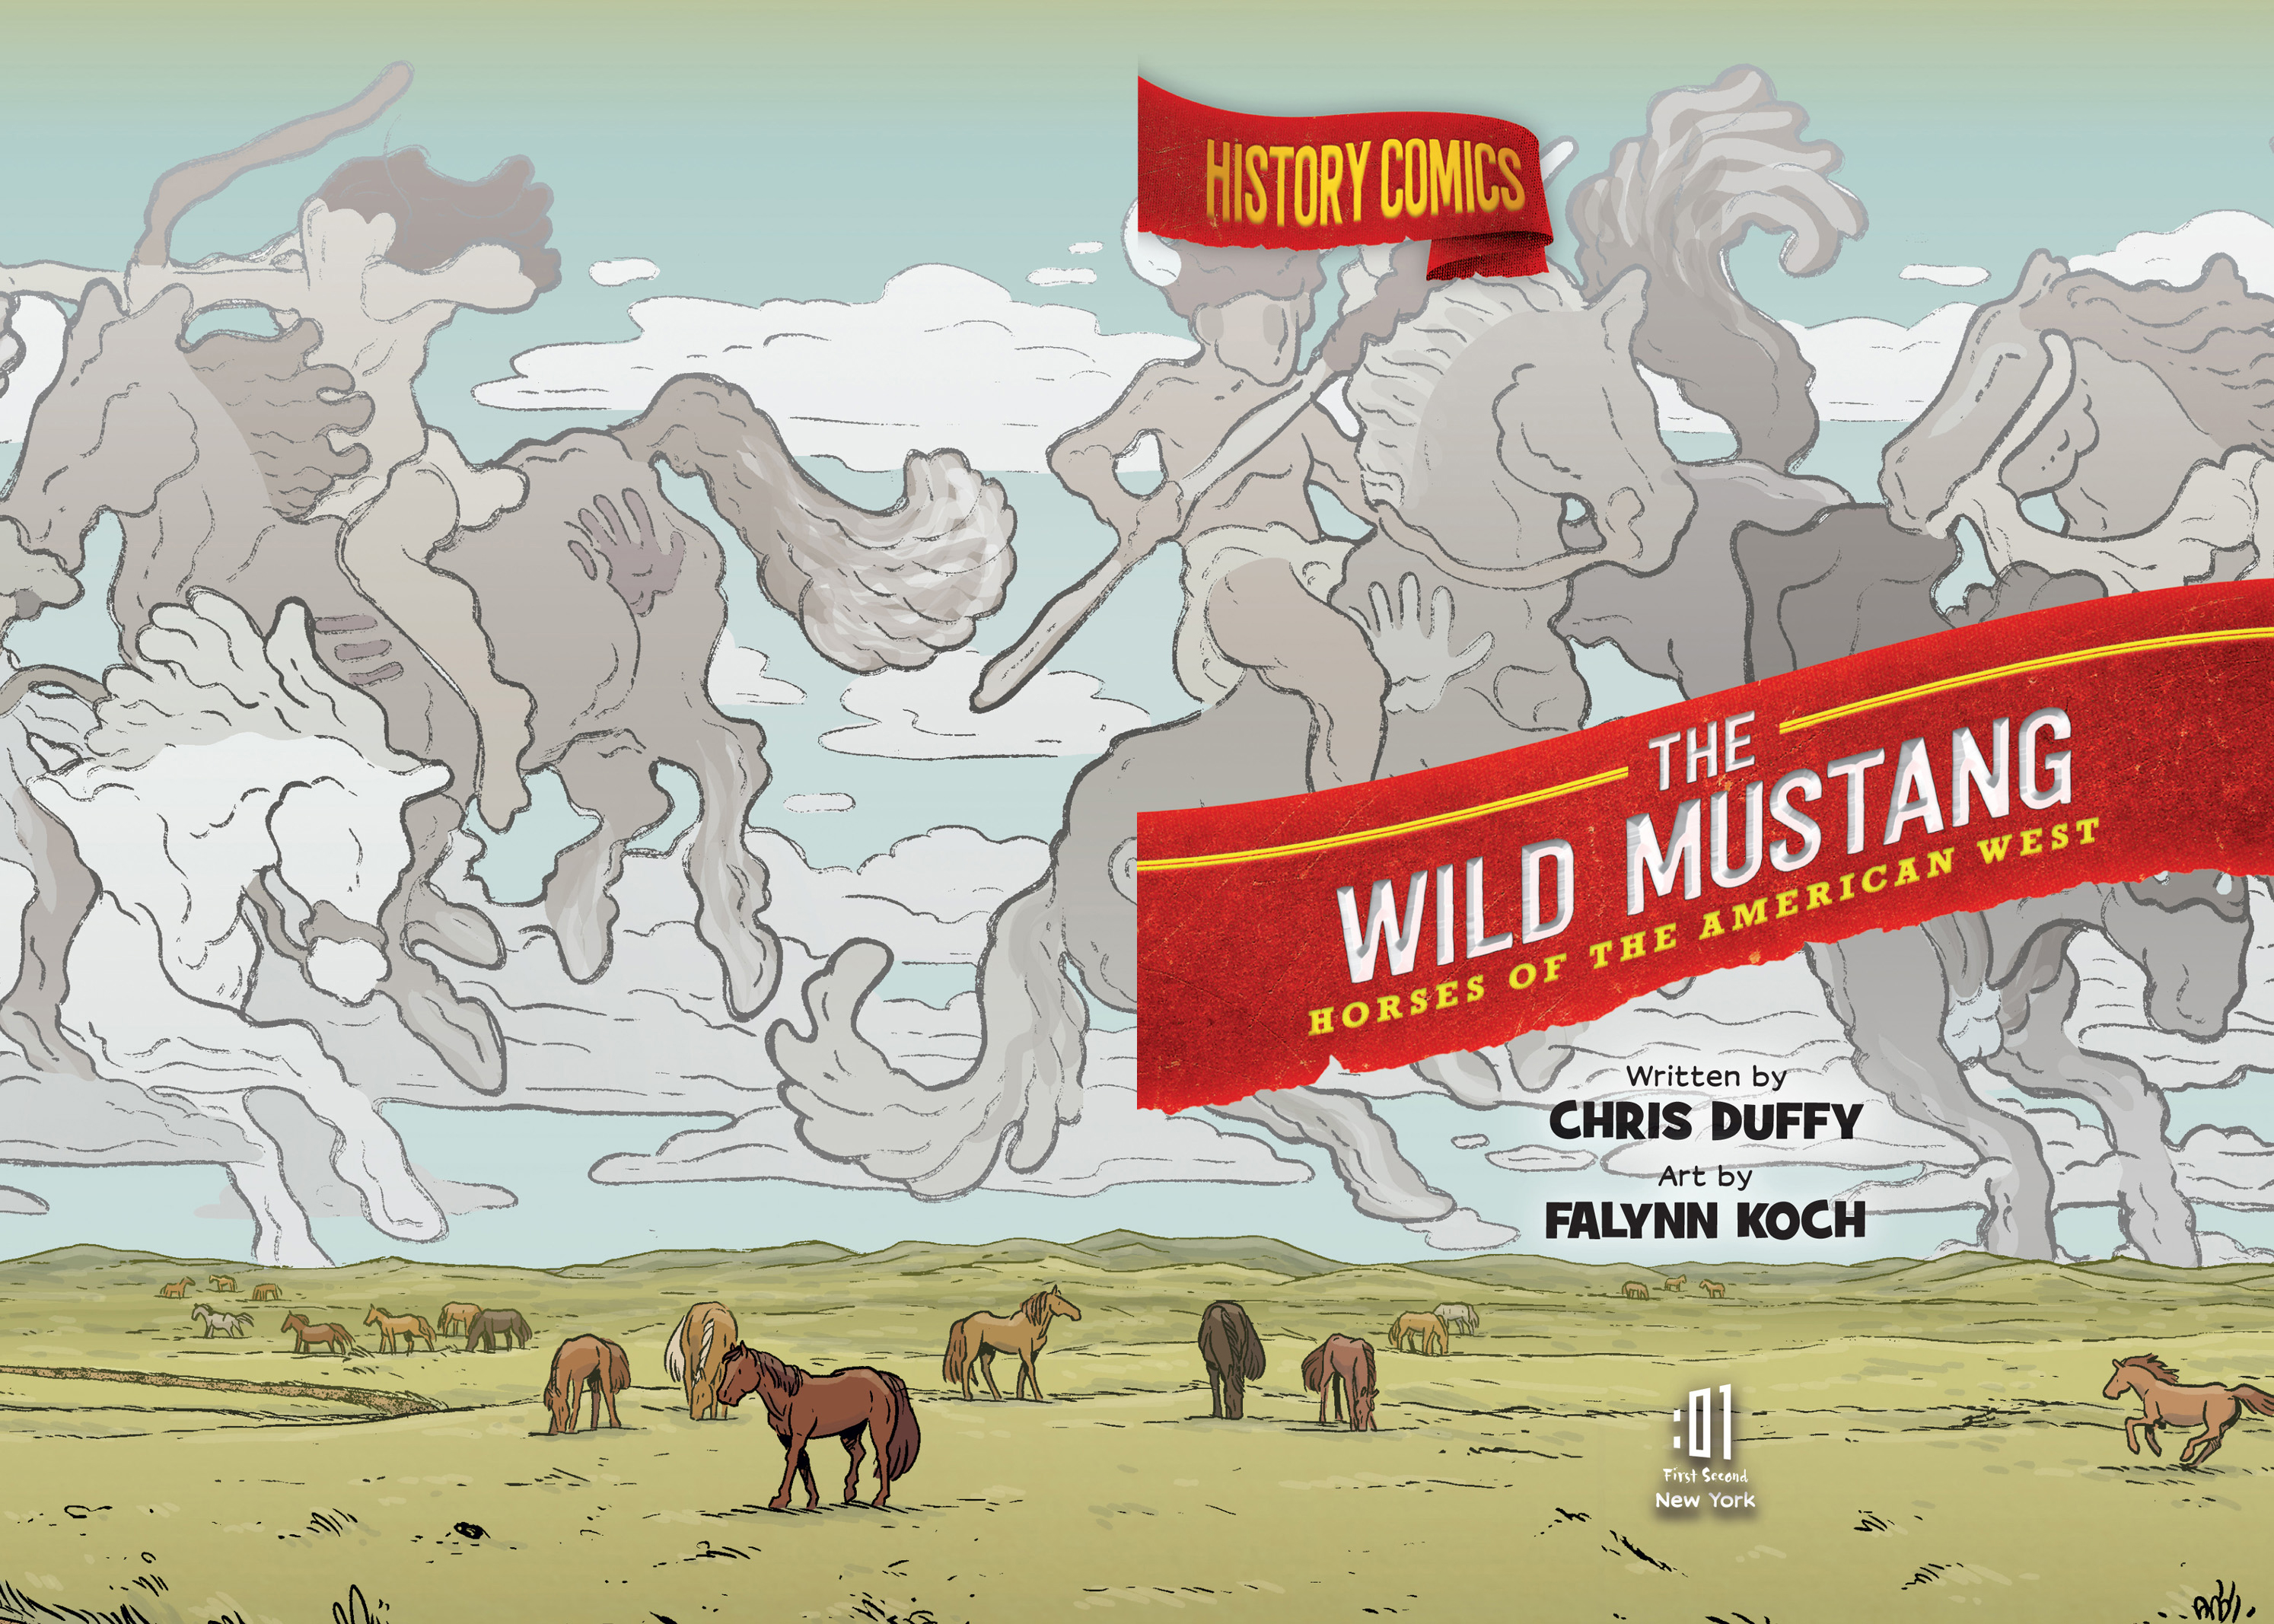 Read online History Comics comic -  Issue # The Wild Mustang - Horses of the American West - 3